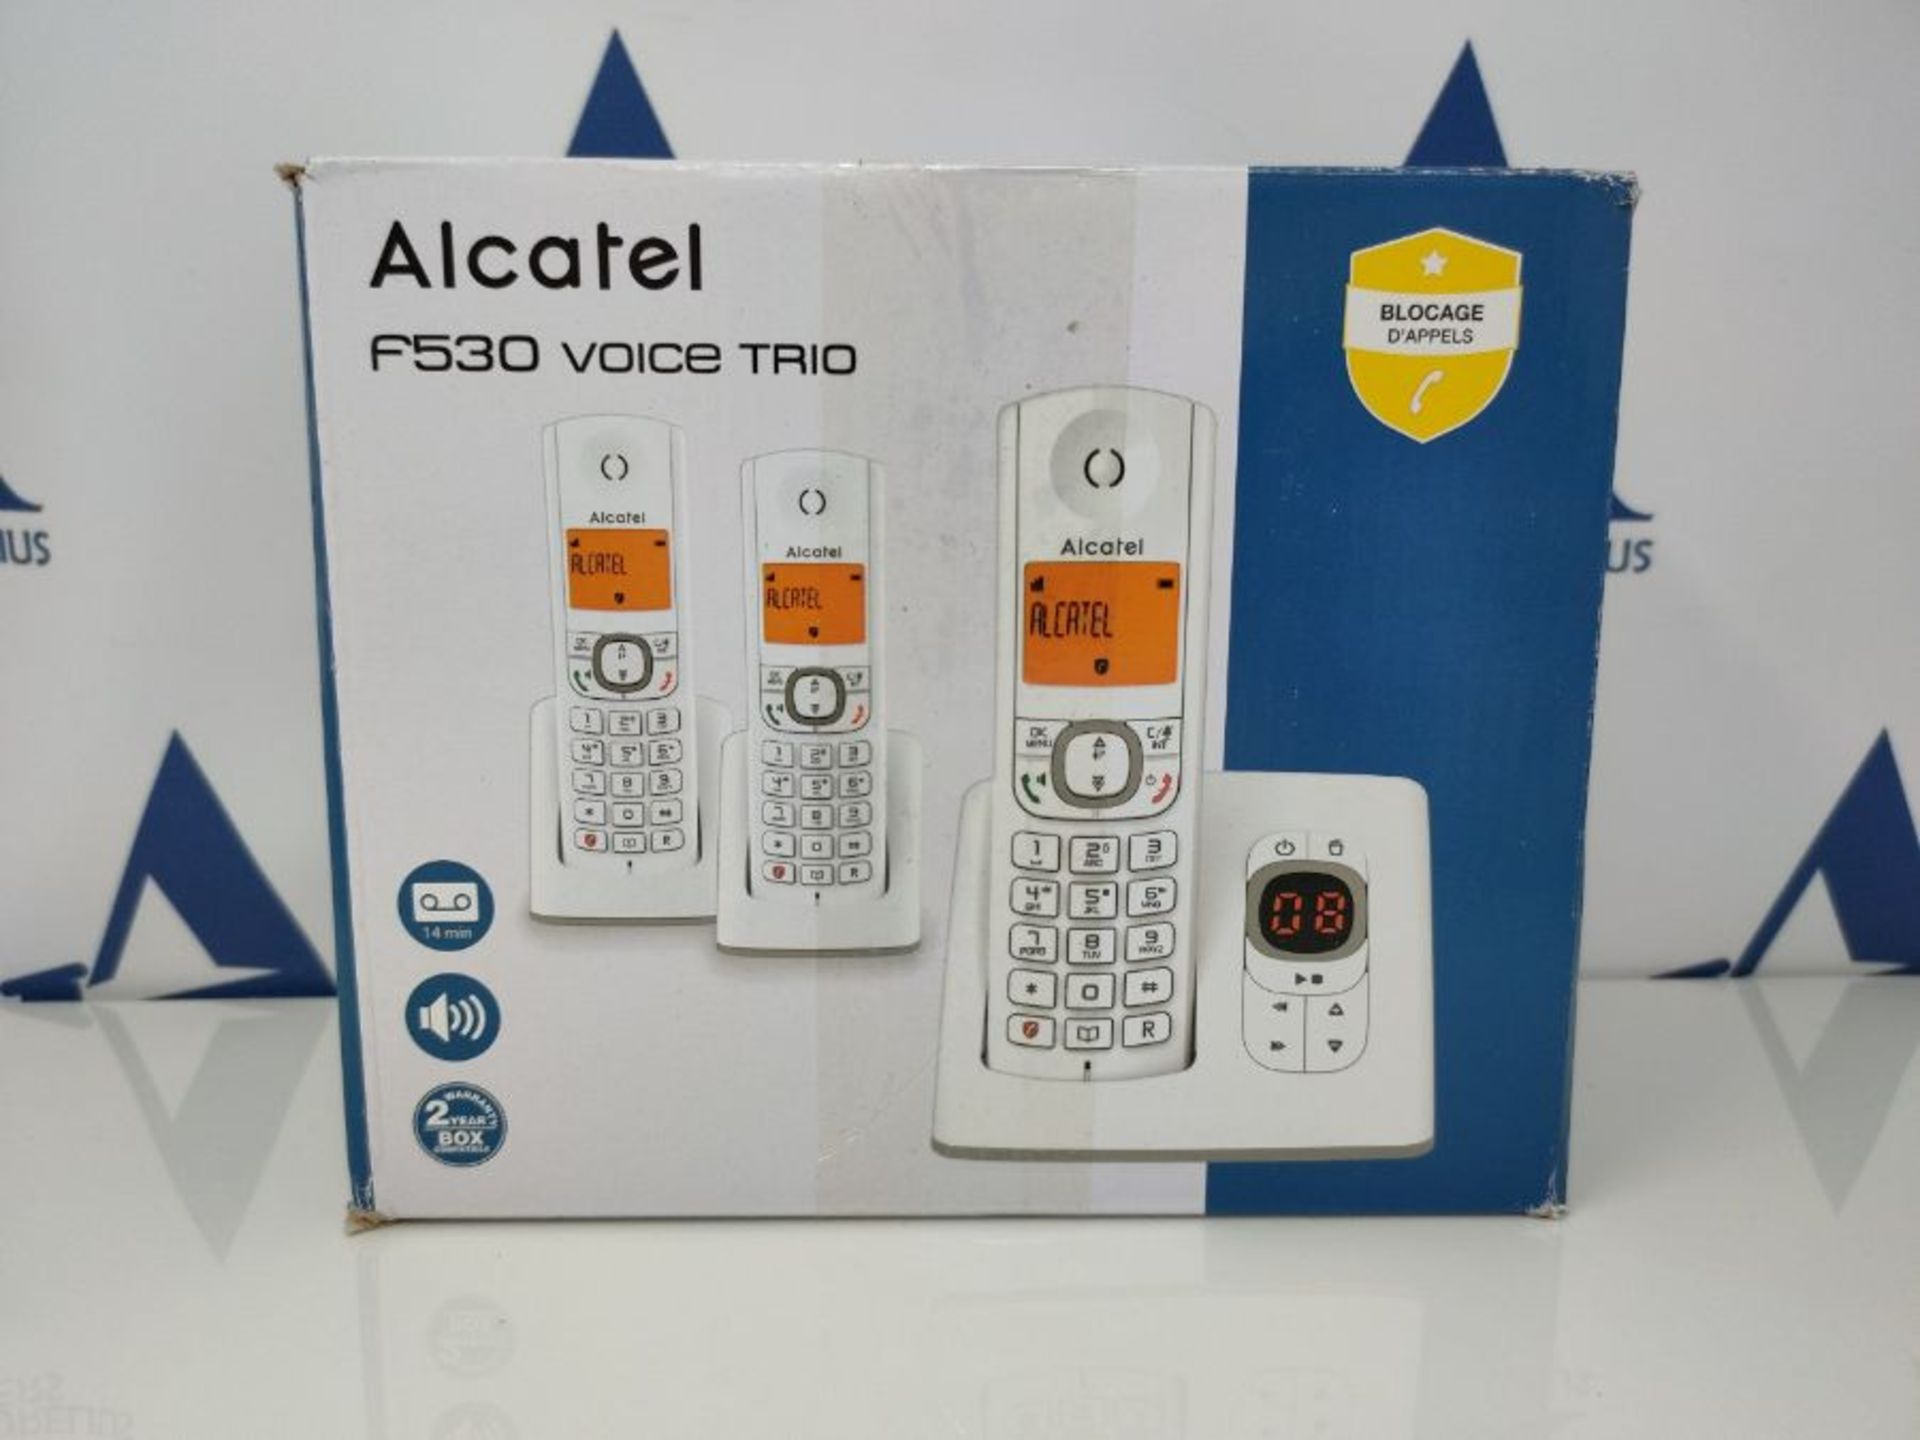 RRP £73.00 Alcatel F530 Voice TRIO Candy-Bar - Image 5 of 9